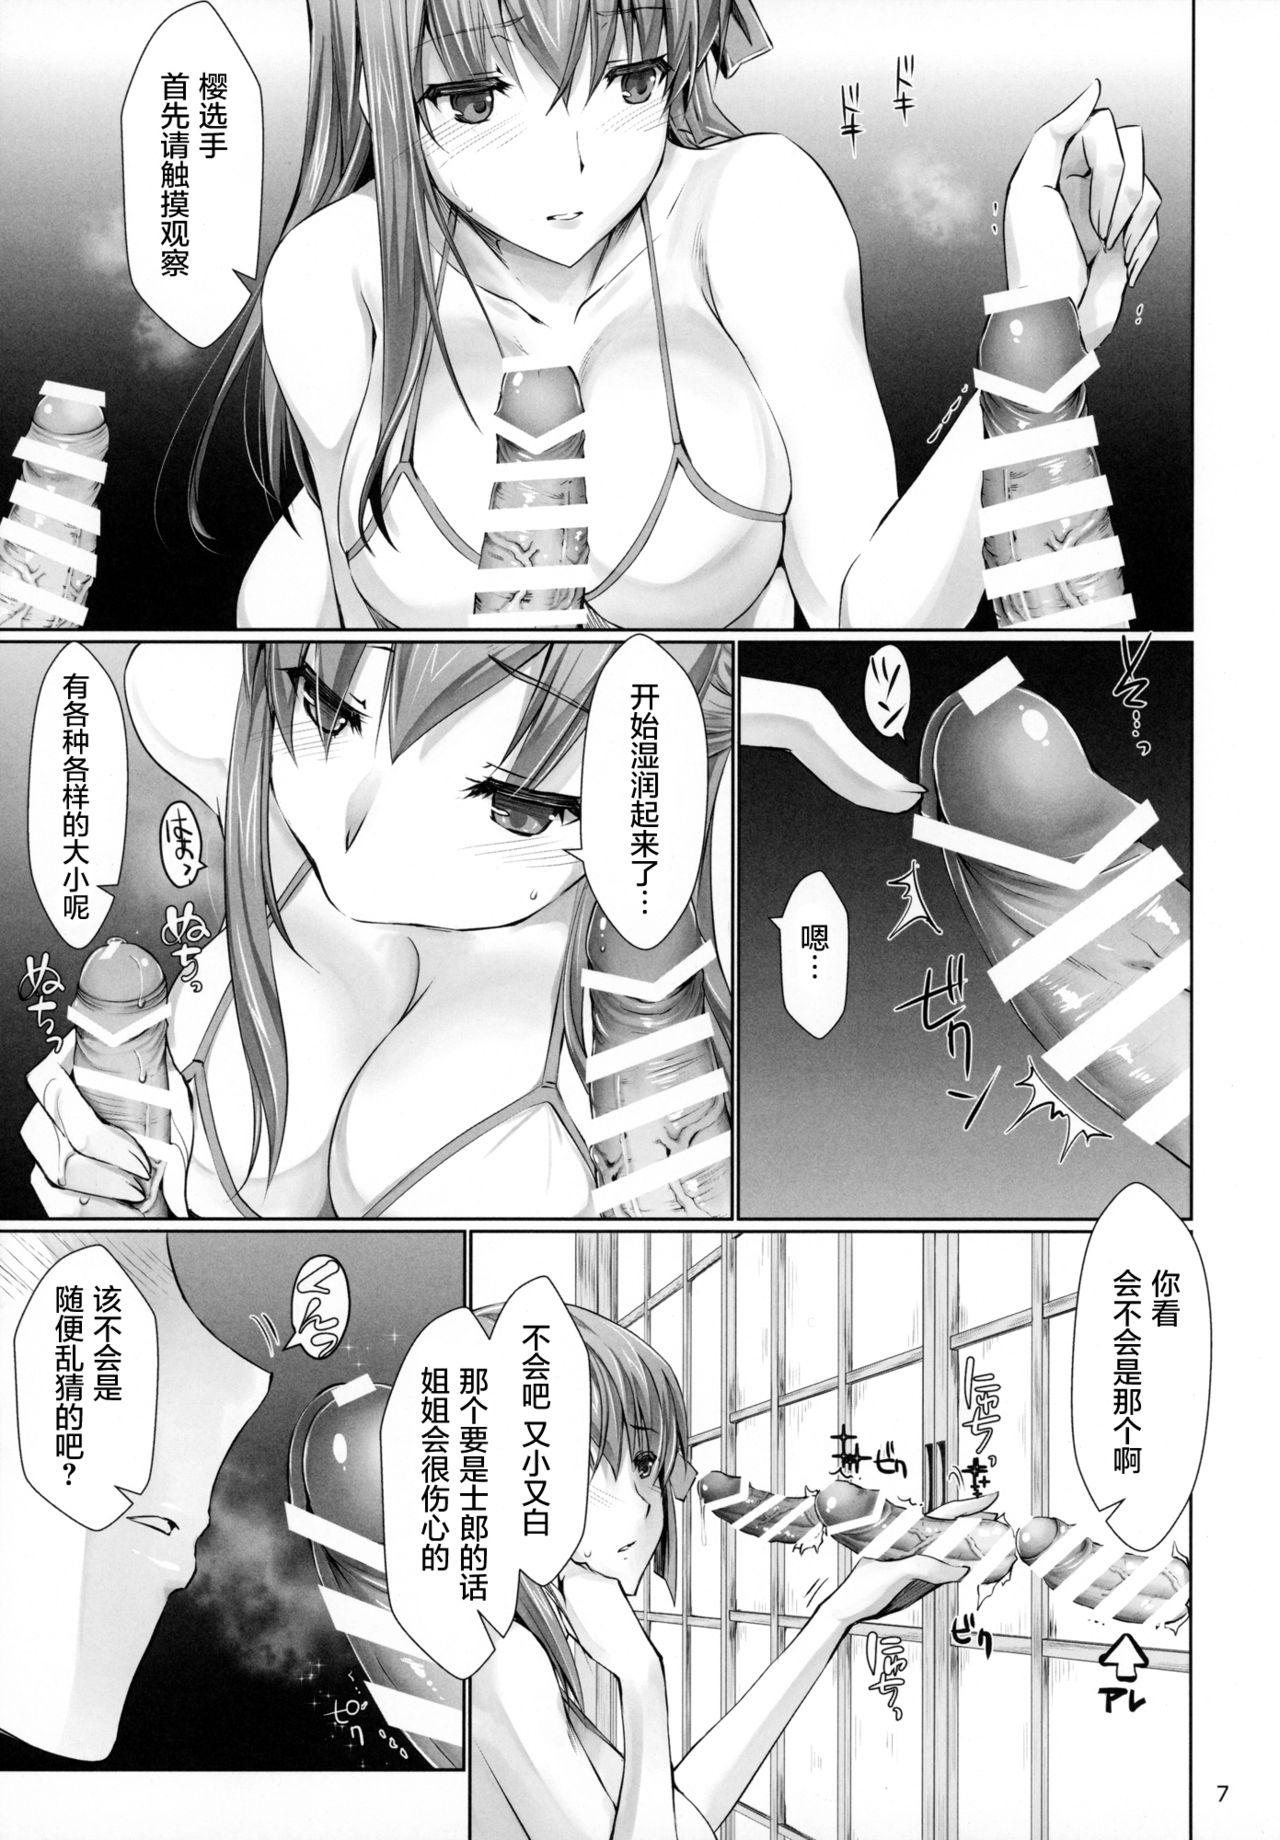 Amatuer I miss you. - Fate stay night Gay Spank - Page 7